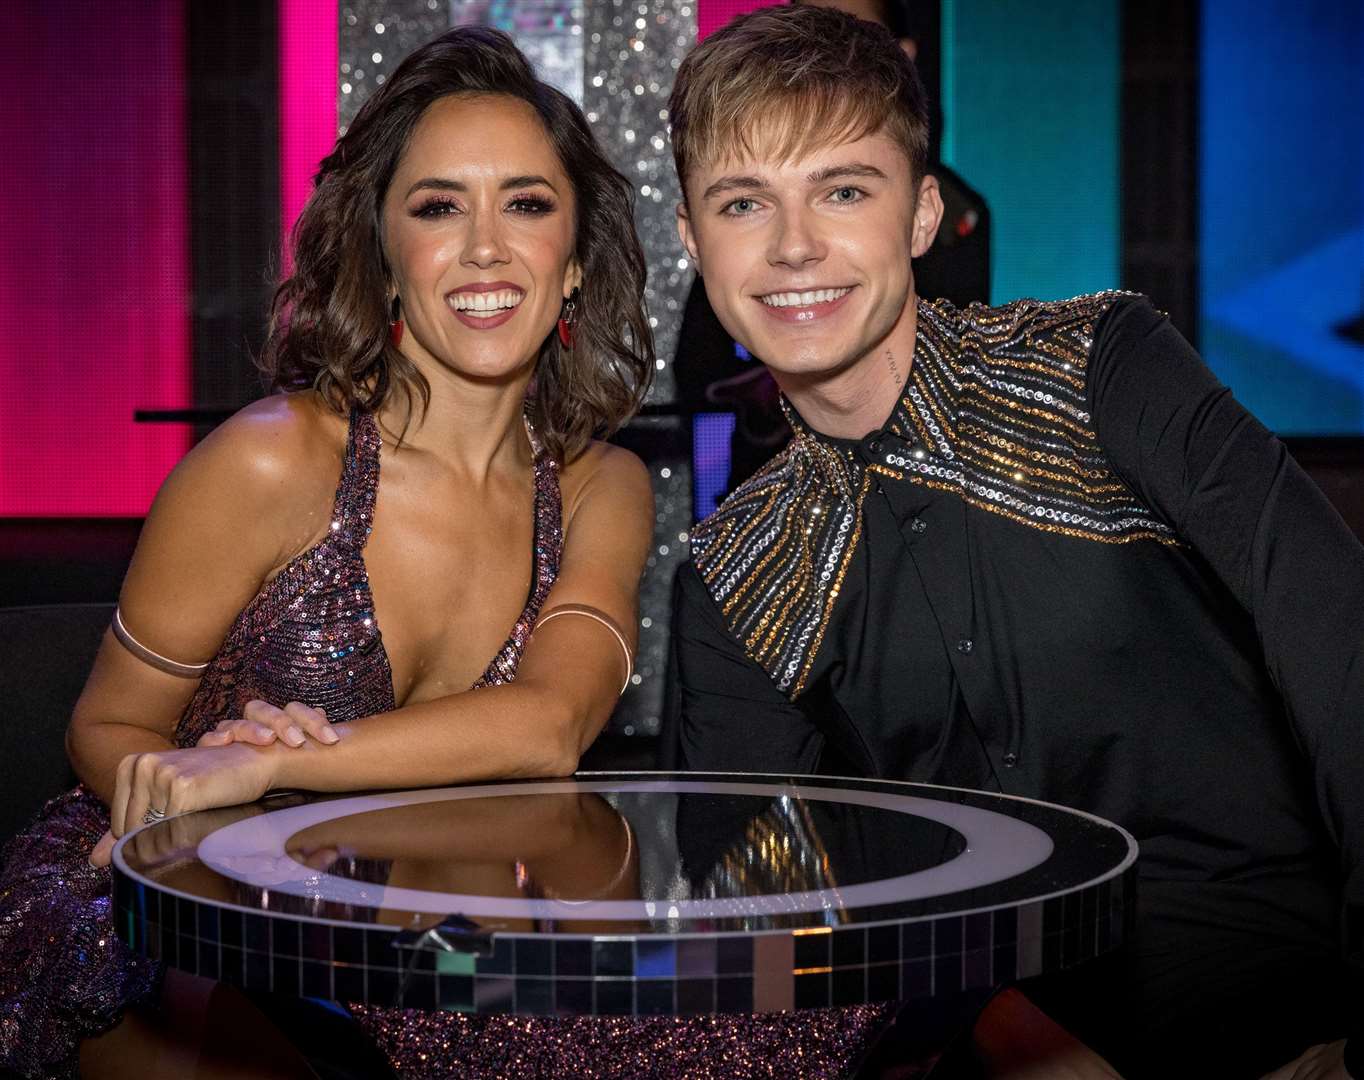 Strictly Come Dancing contestant HRVY has been partnered with professional dancer Janette Manrara for the new series. Photo: BBC/Guy Levy